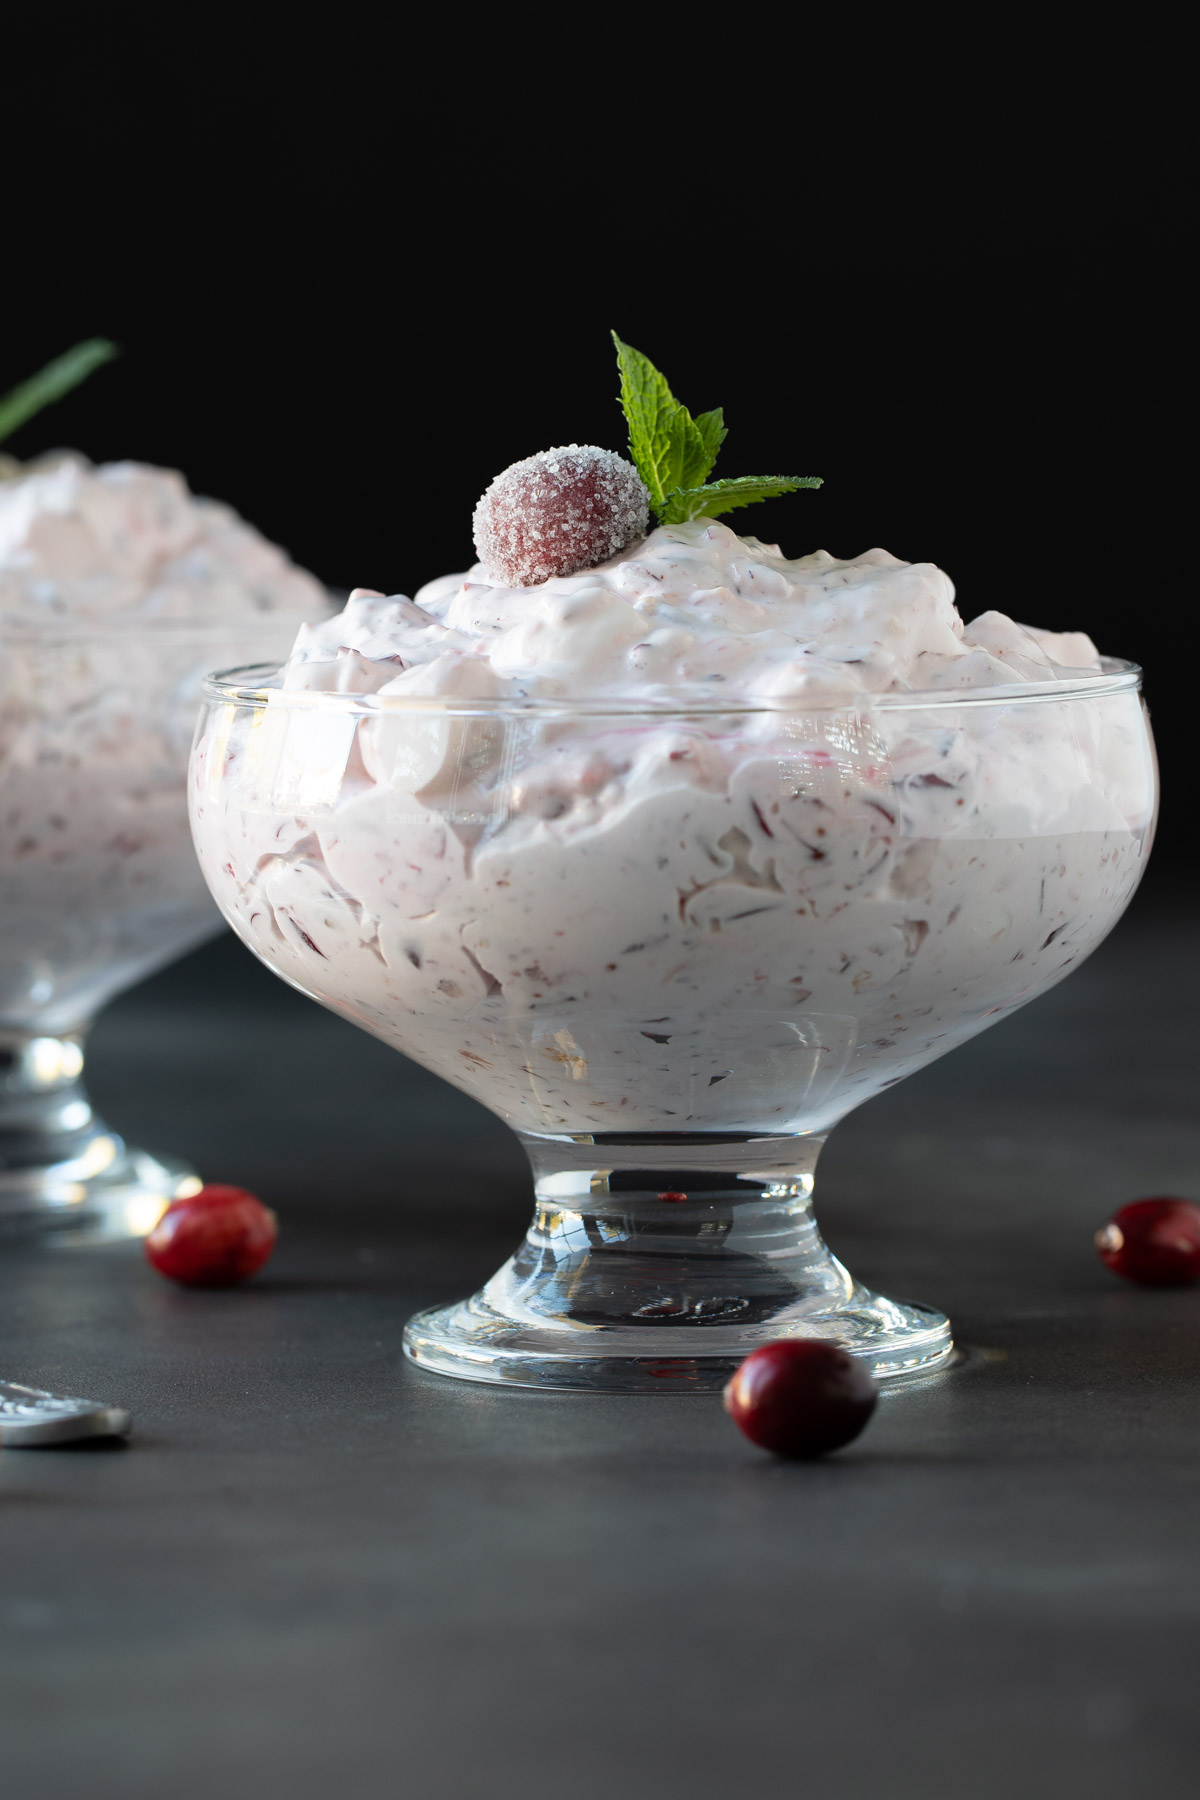 Front view of cranberry fluff salad in a dessert dish garnished with fresh mint.